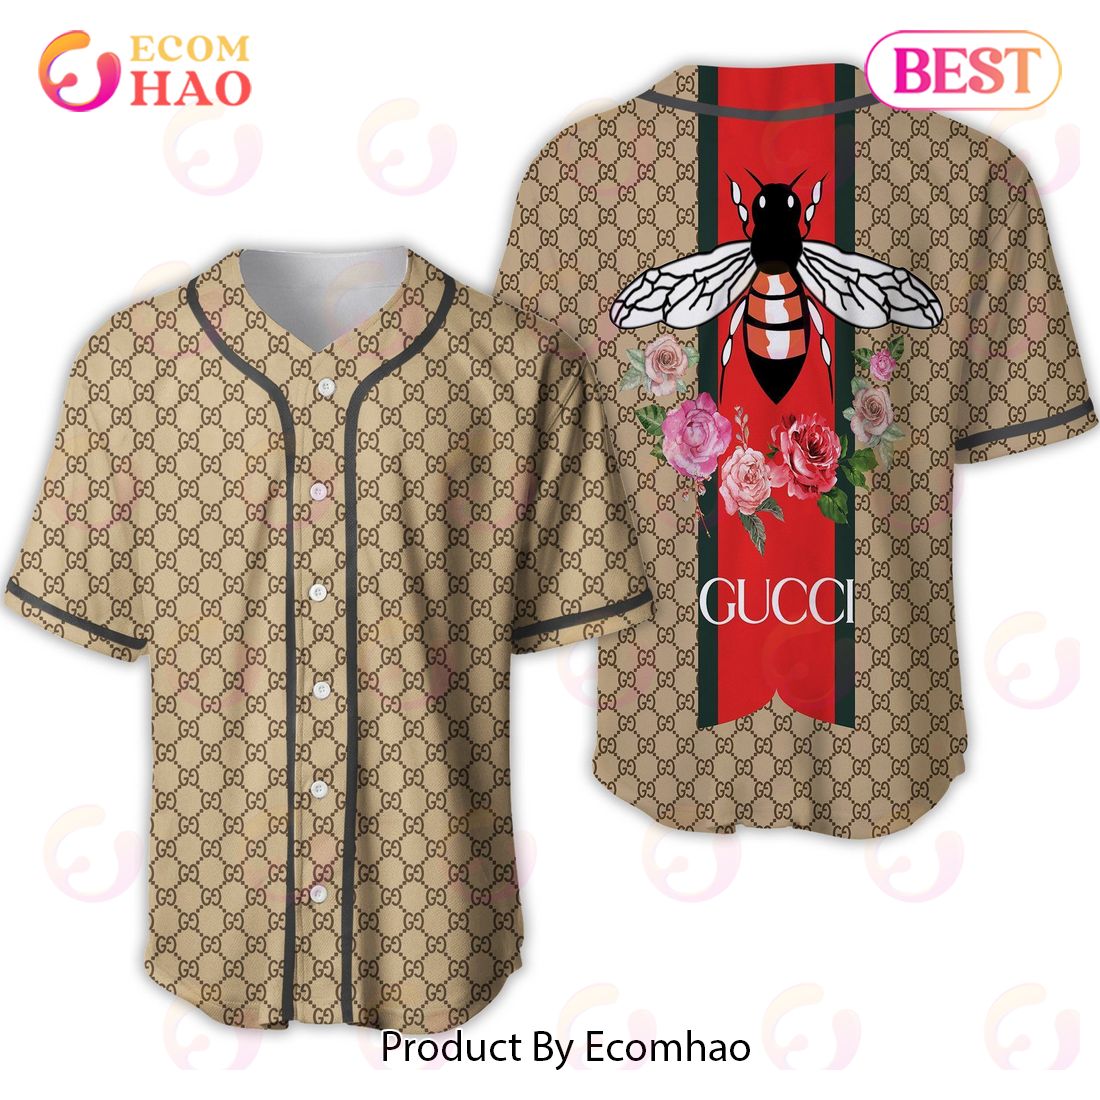 Gucci Bee Flower Luxury Brand Jersey Limited Edition